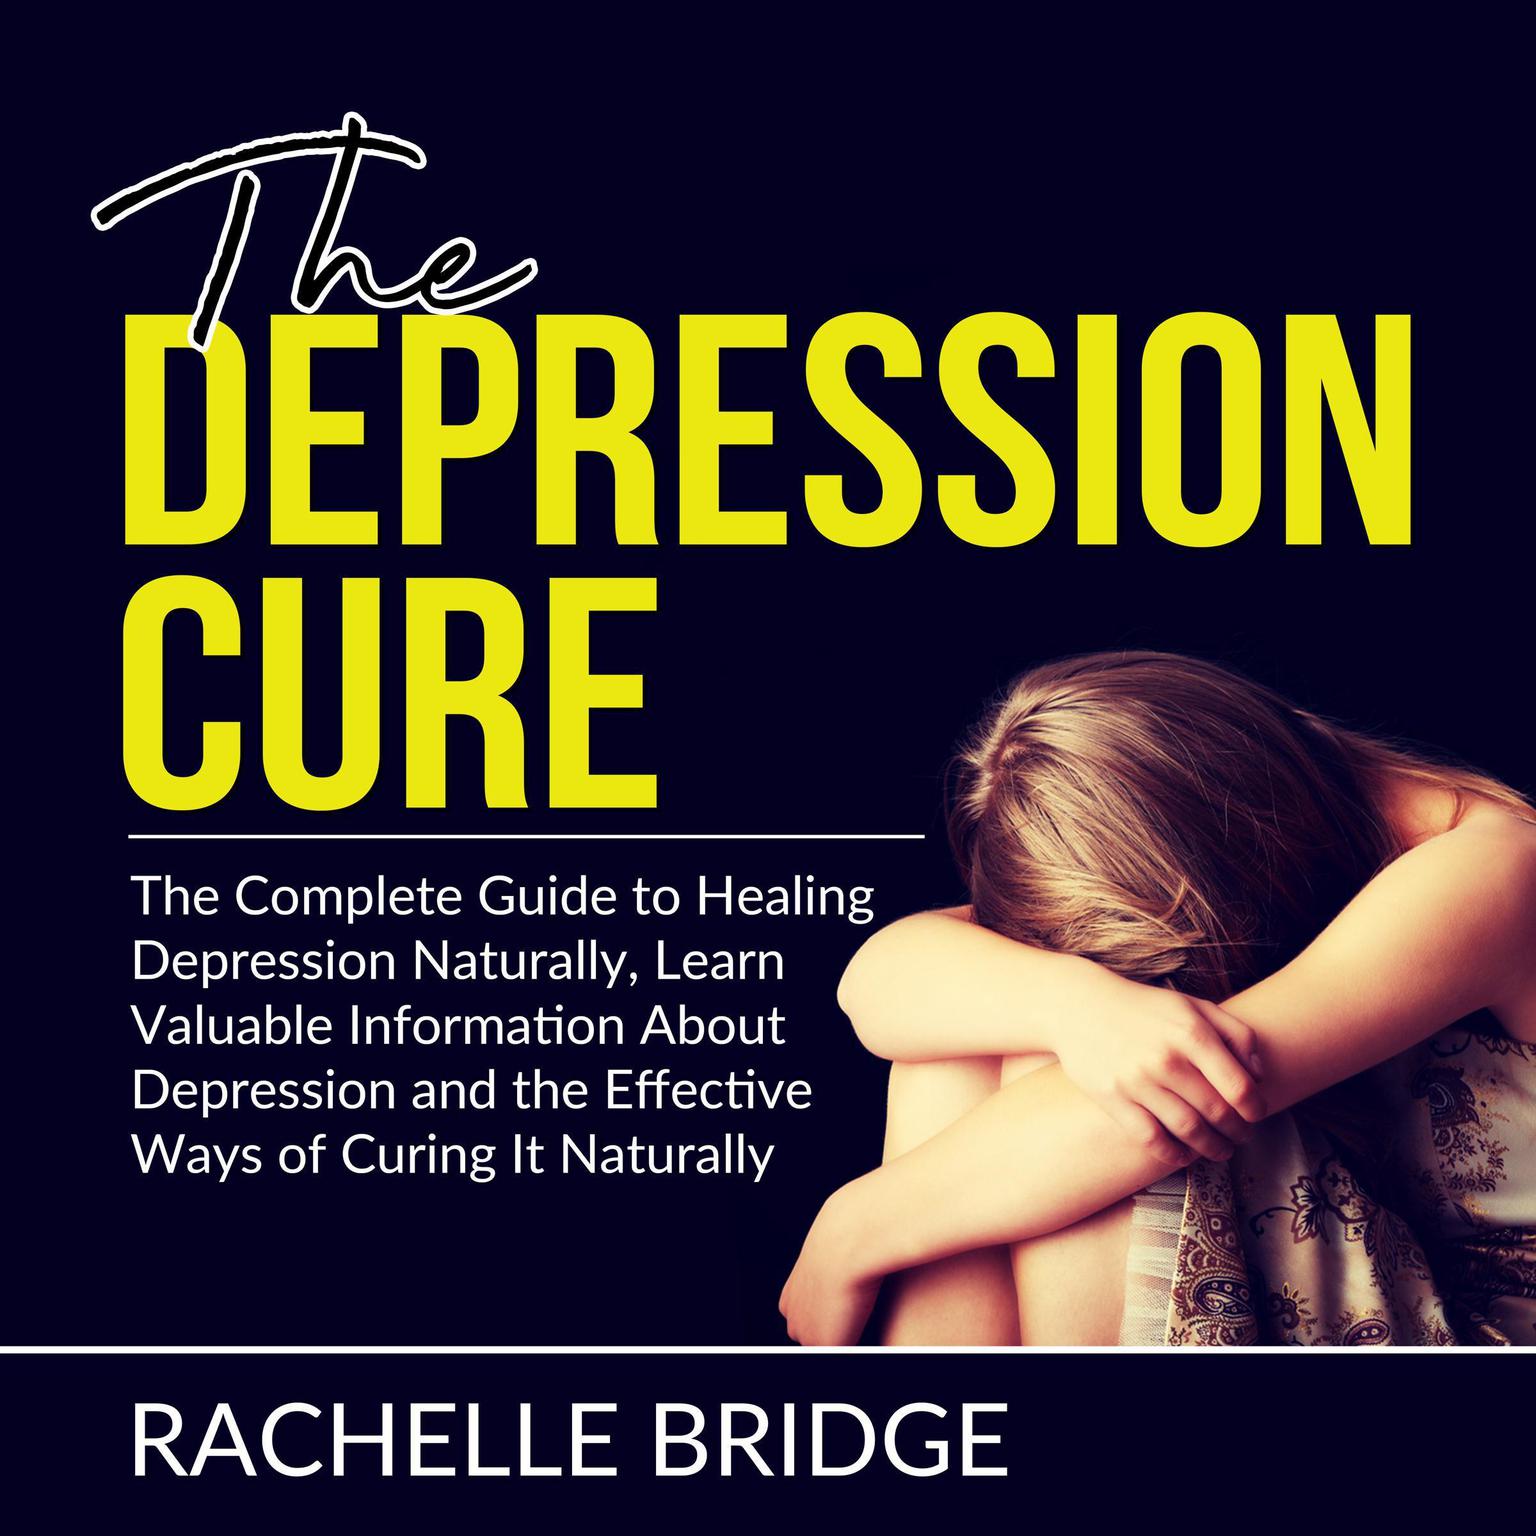 The Depression Cure: The Complete Guide to Healing Depression Naturally, Learn Valuable Information About Depression and the Effective Ways of Curing It Naturally Audiobook, by Rachelle Bridge